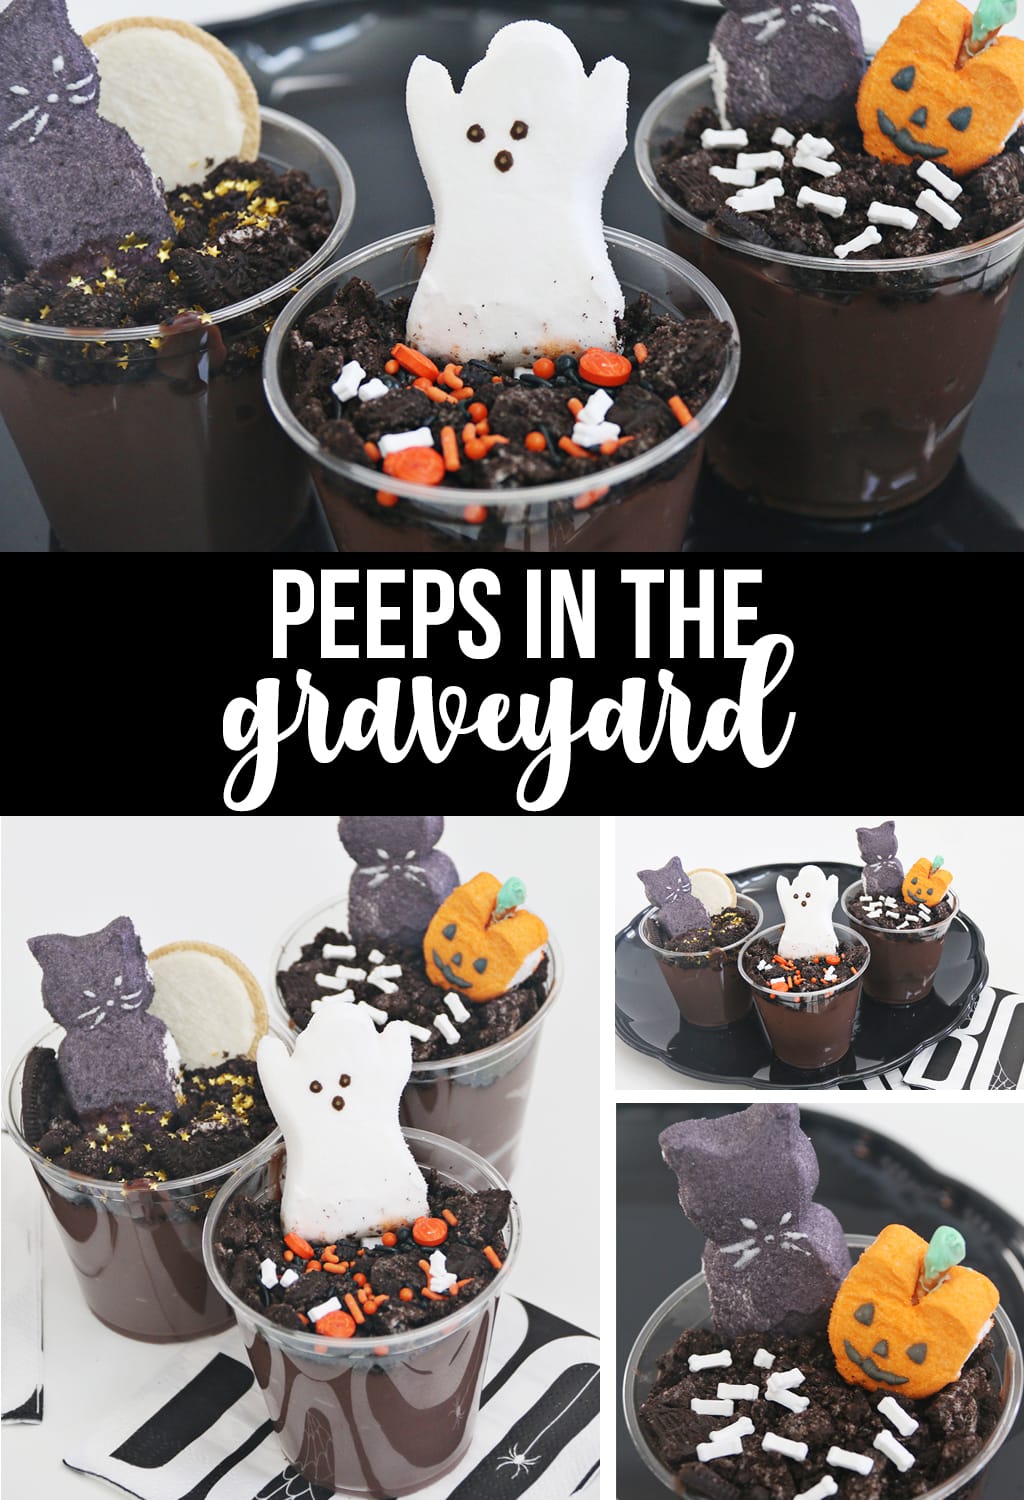 Recipe for Peeps in the Graveyard